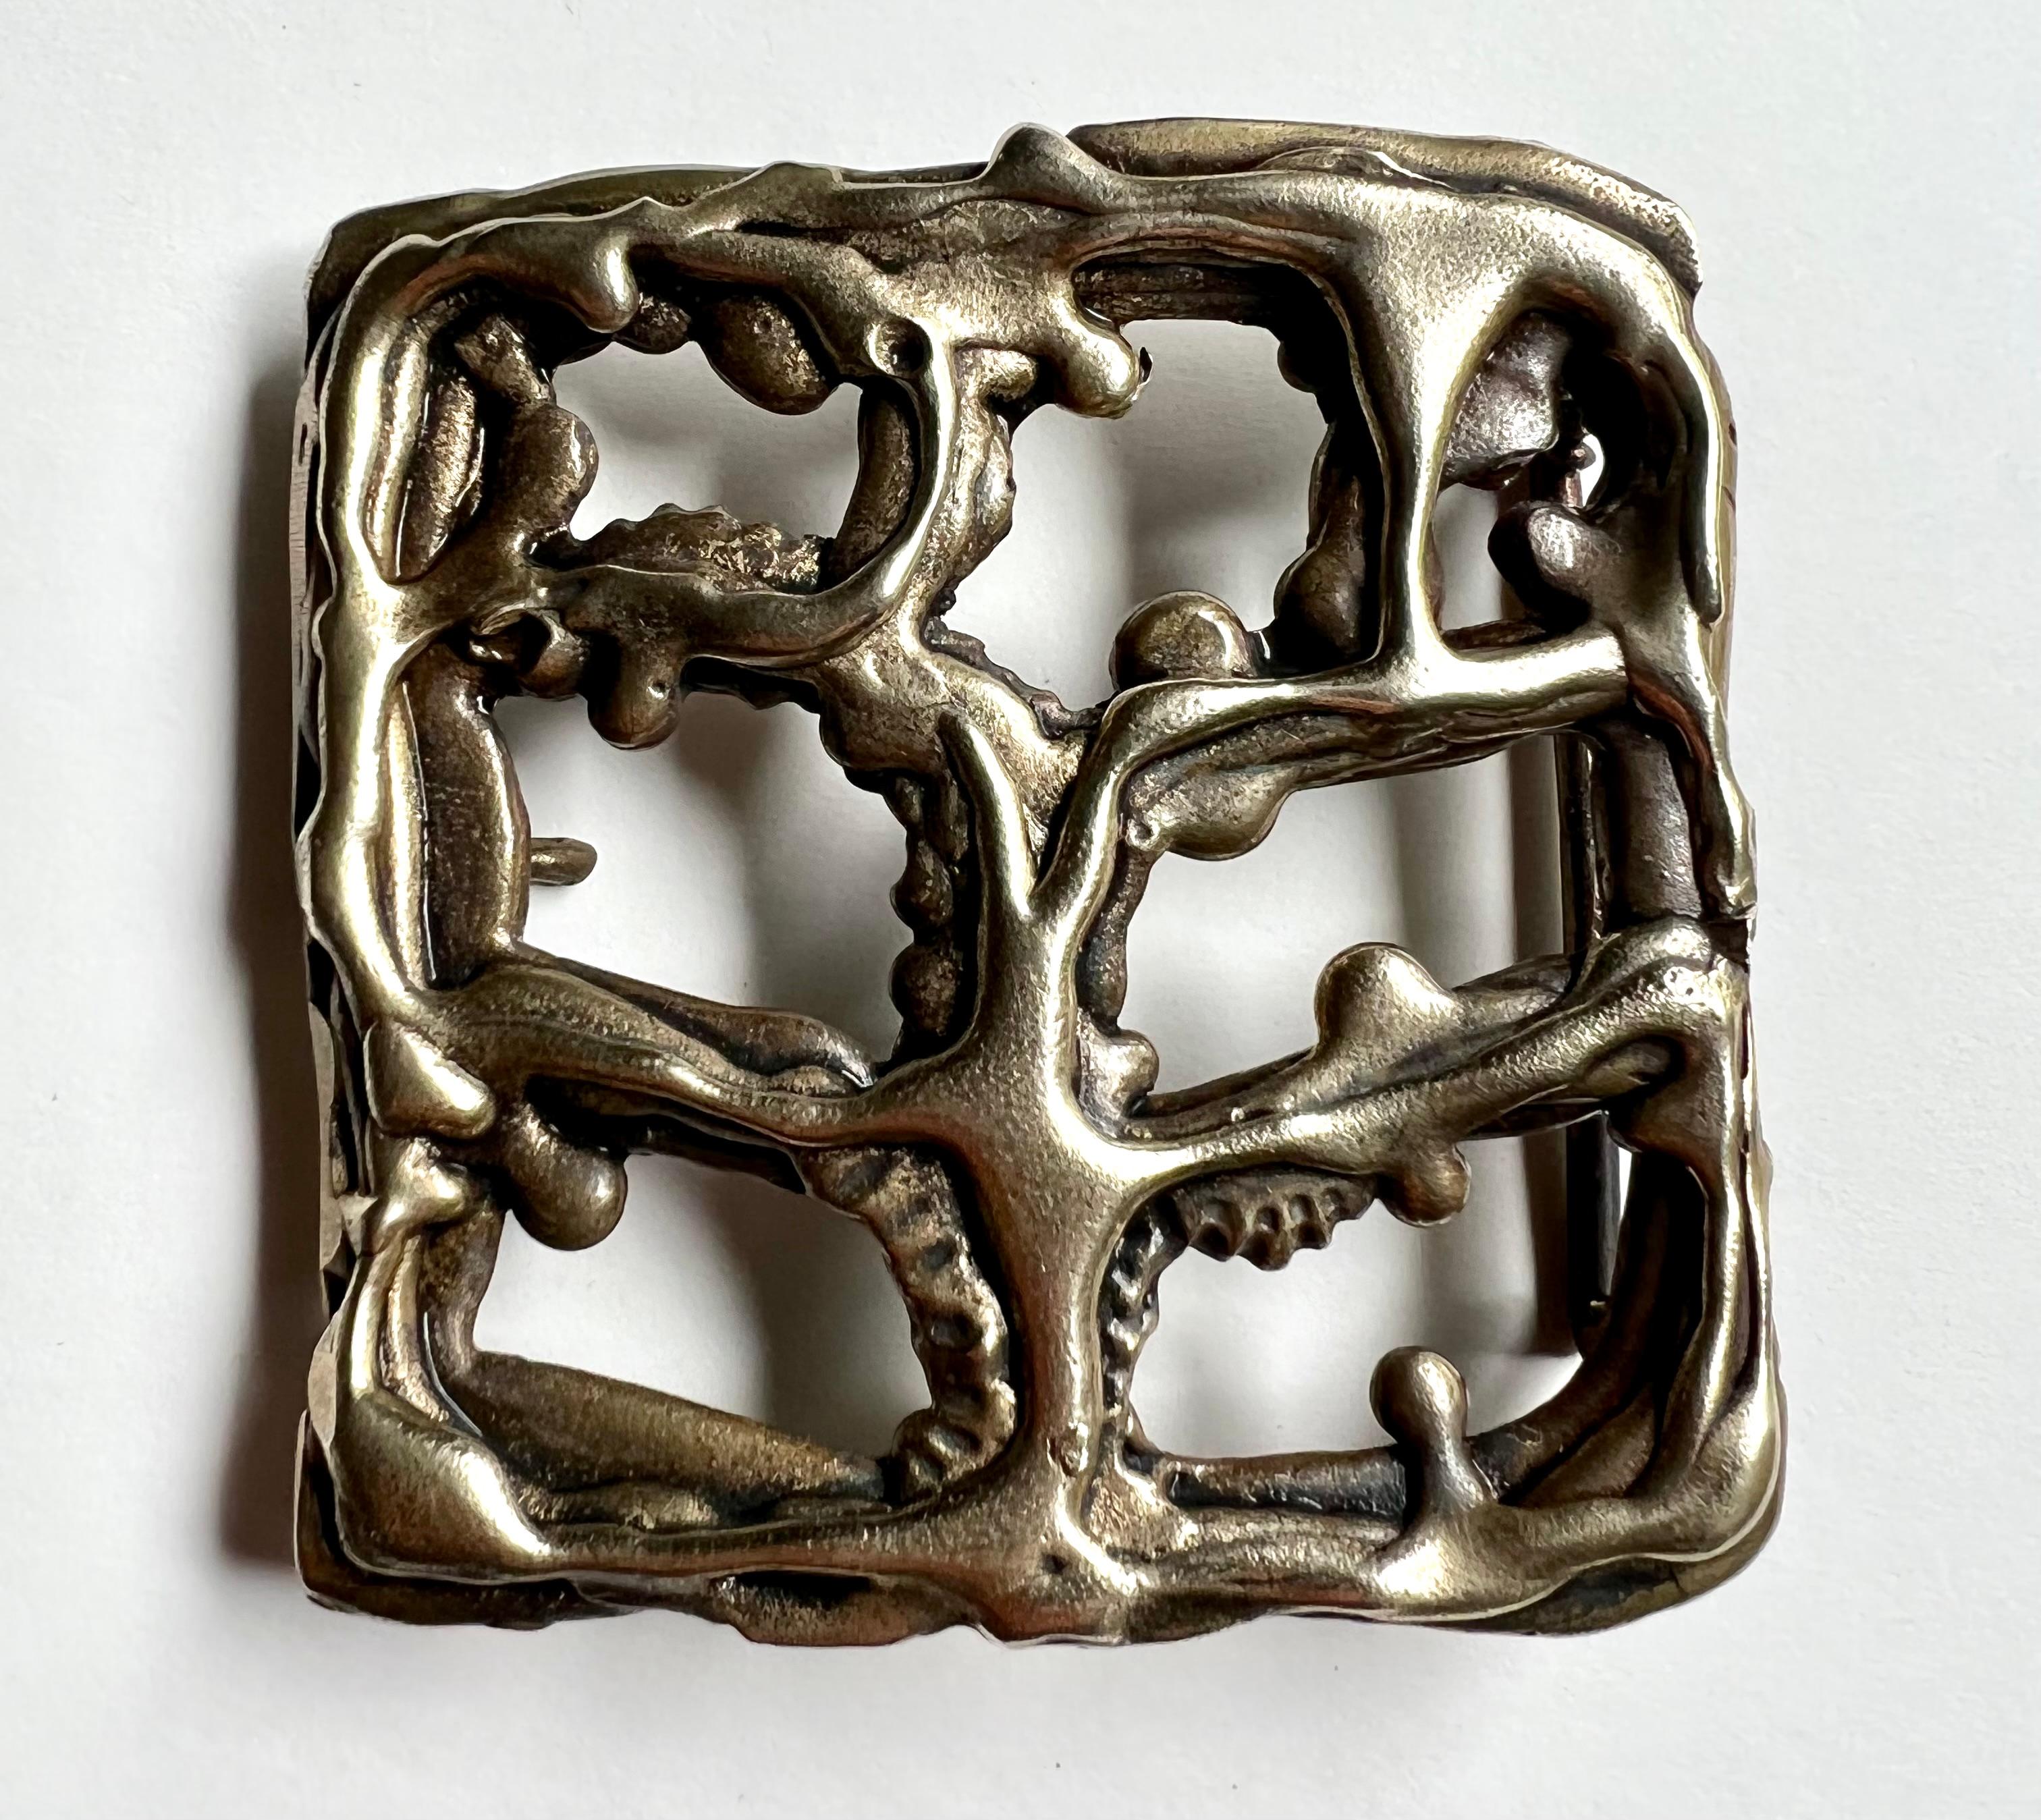 A very unique Brutalist brass belt buckle. Unique and one of a kind, this buckle will stand out and make a statement. In the Brutalist style, a wonderful compilation of interesting brass forms coming together. The piece is perfectly smooth and will